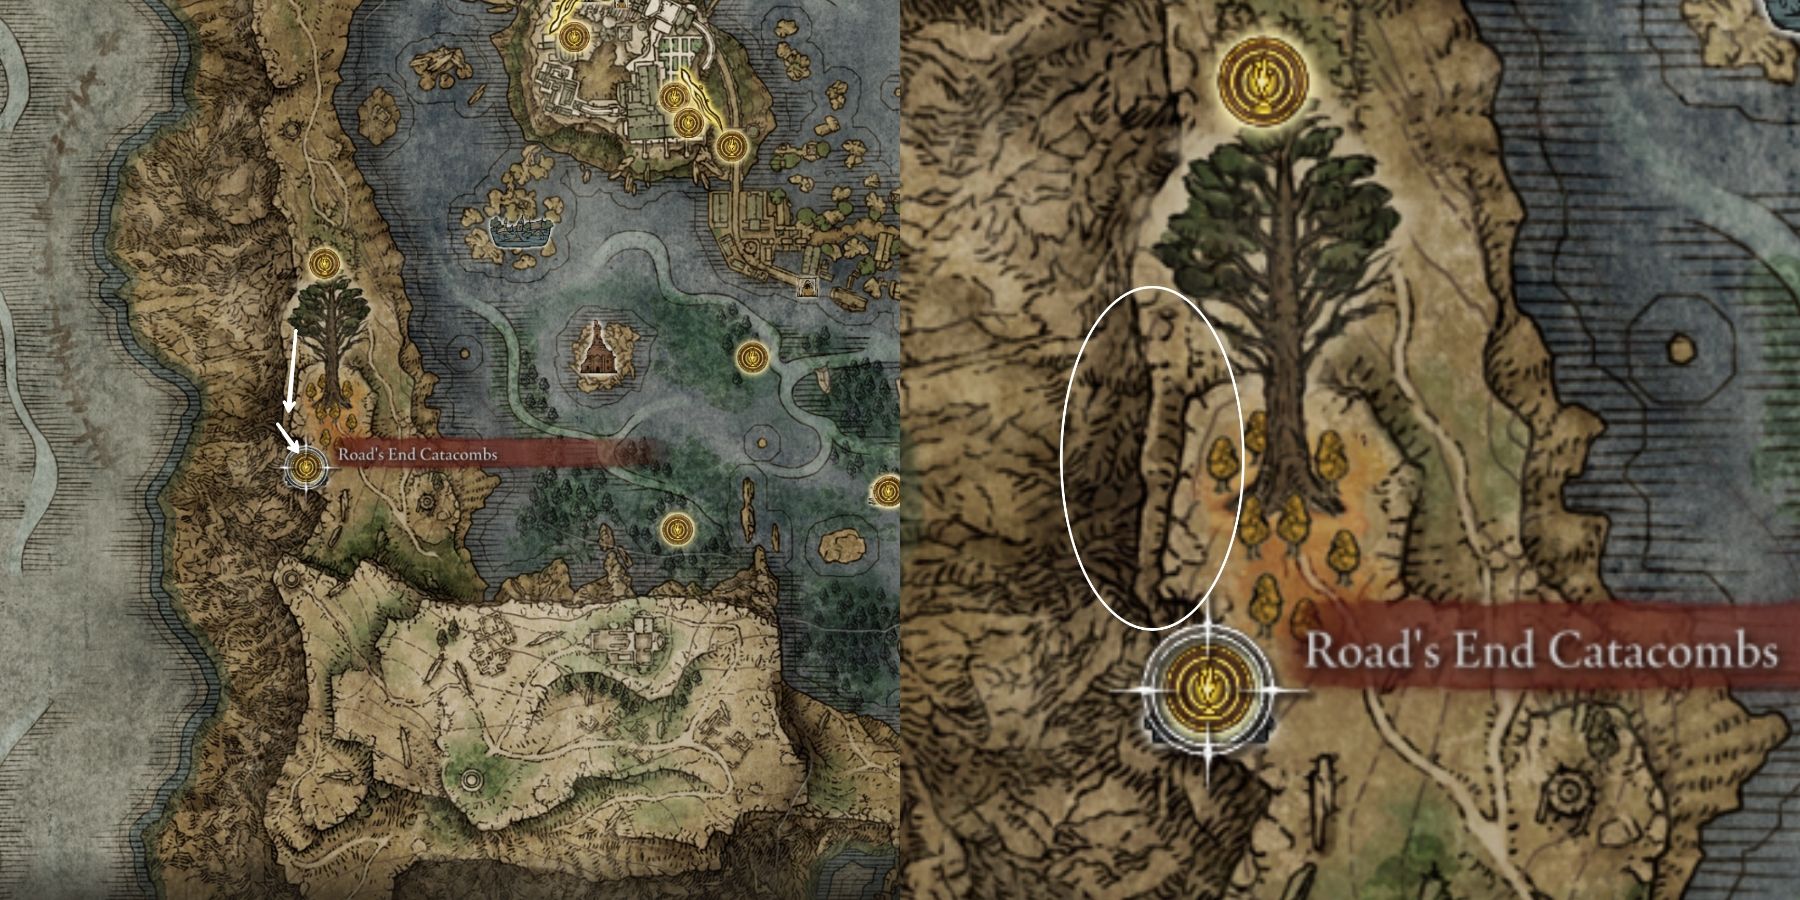 Road's End Catacombs location in Elden Ring